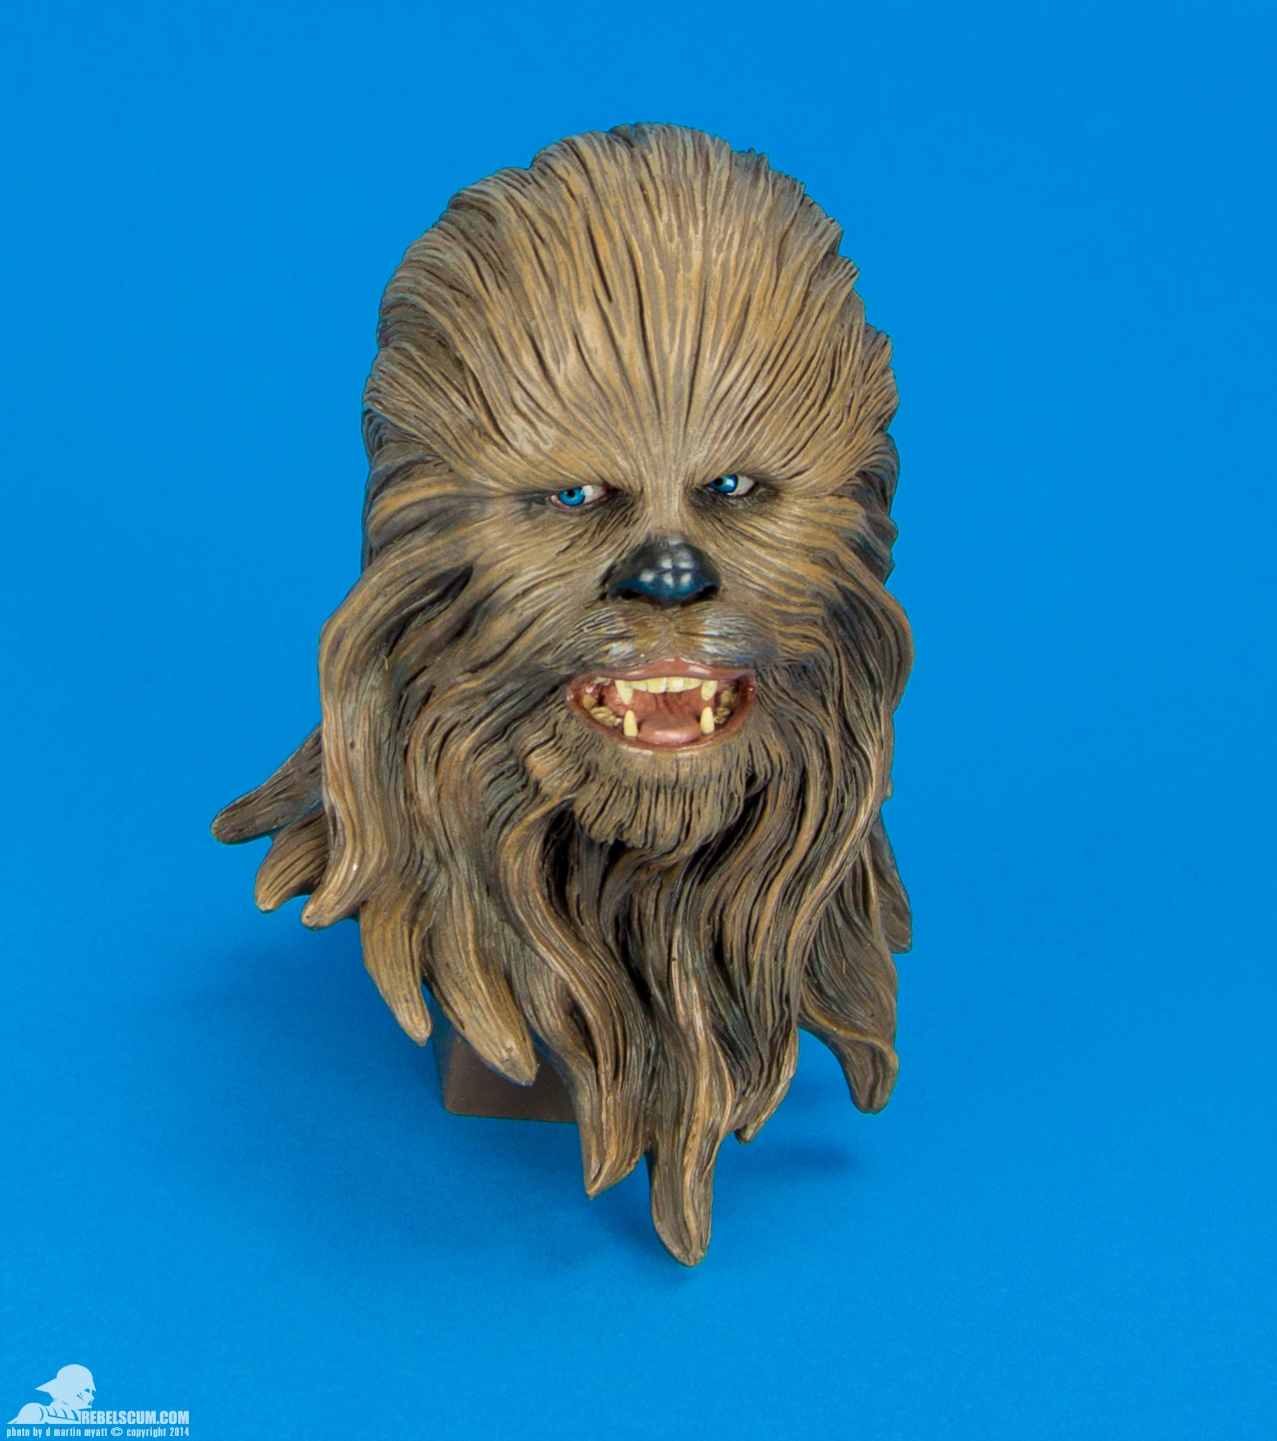 Chewbacca-Premium-Format-Figure-Sideshow-Collectibles-Exclusive-015.jpg